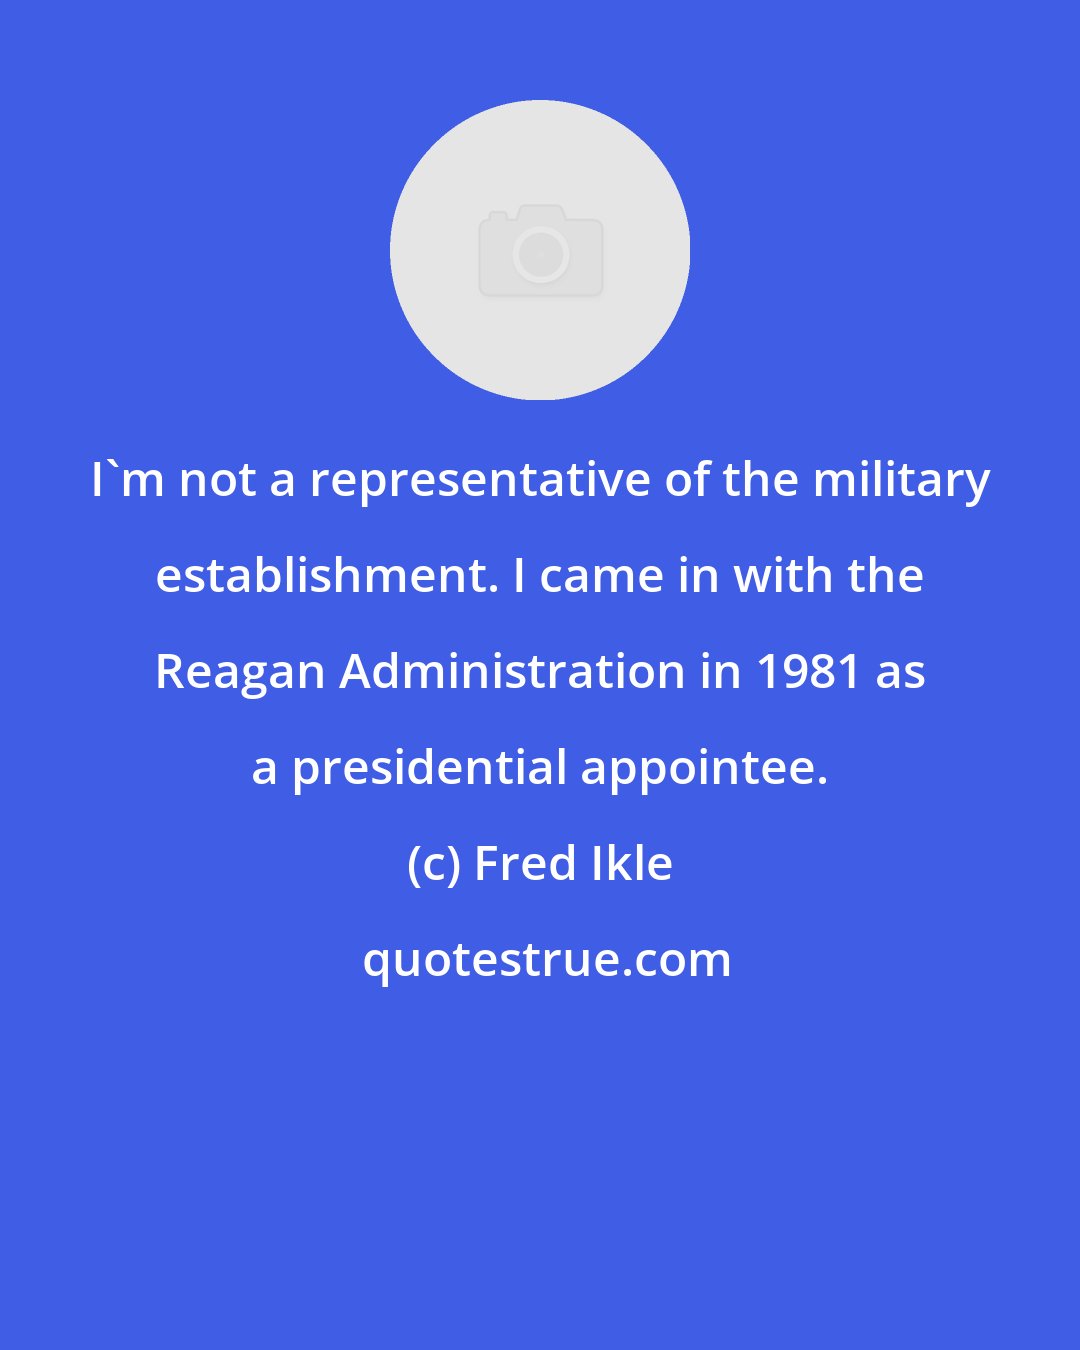 Fred Ikle: I'm not a representative of the military establishment. I came in with the Reagan Administration in 1981 as a presidential appointee.